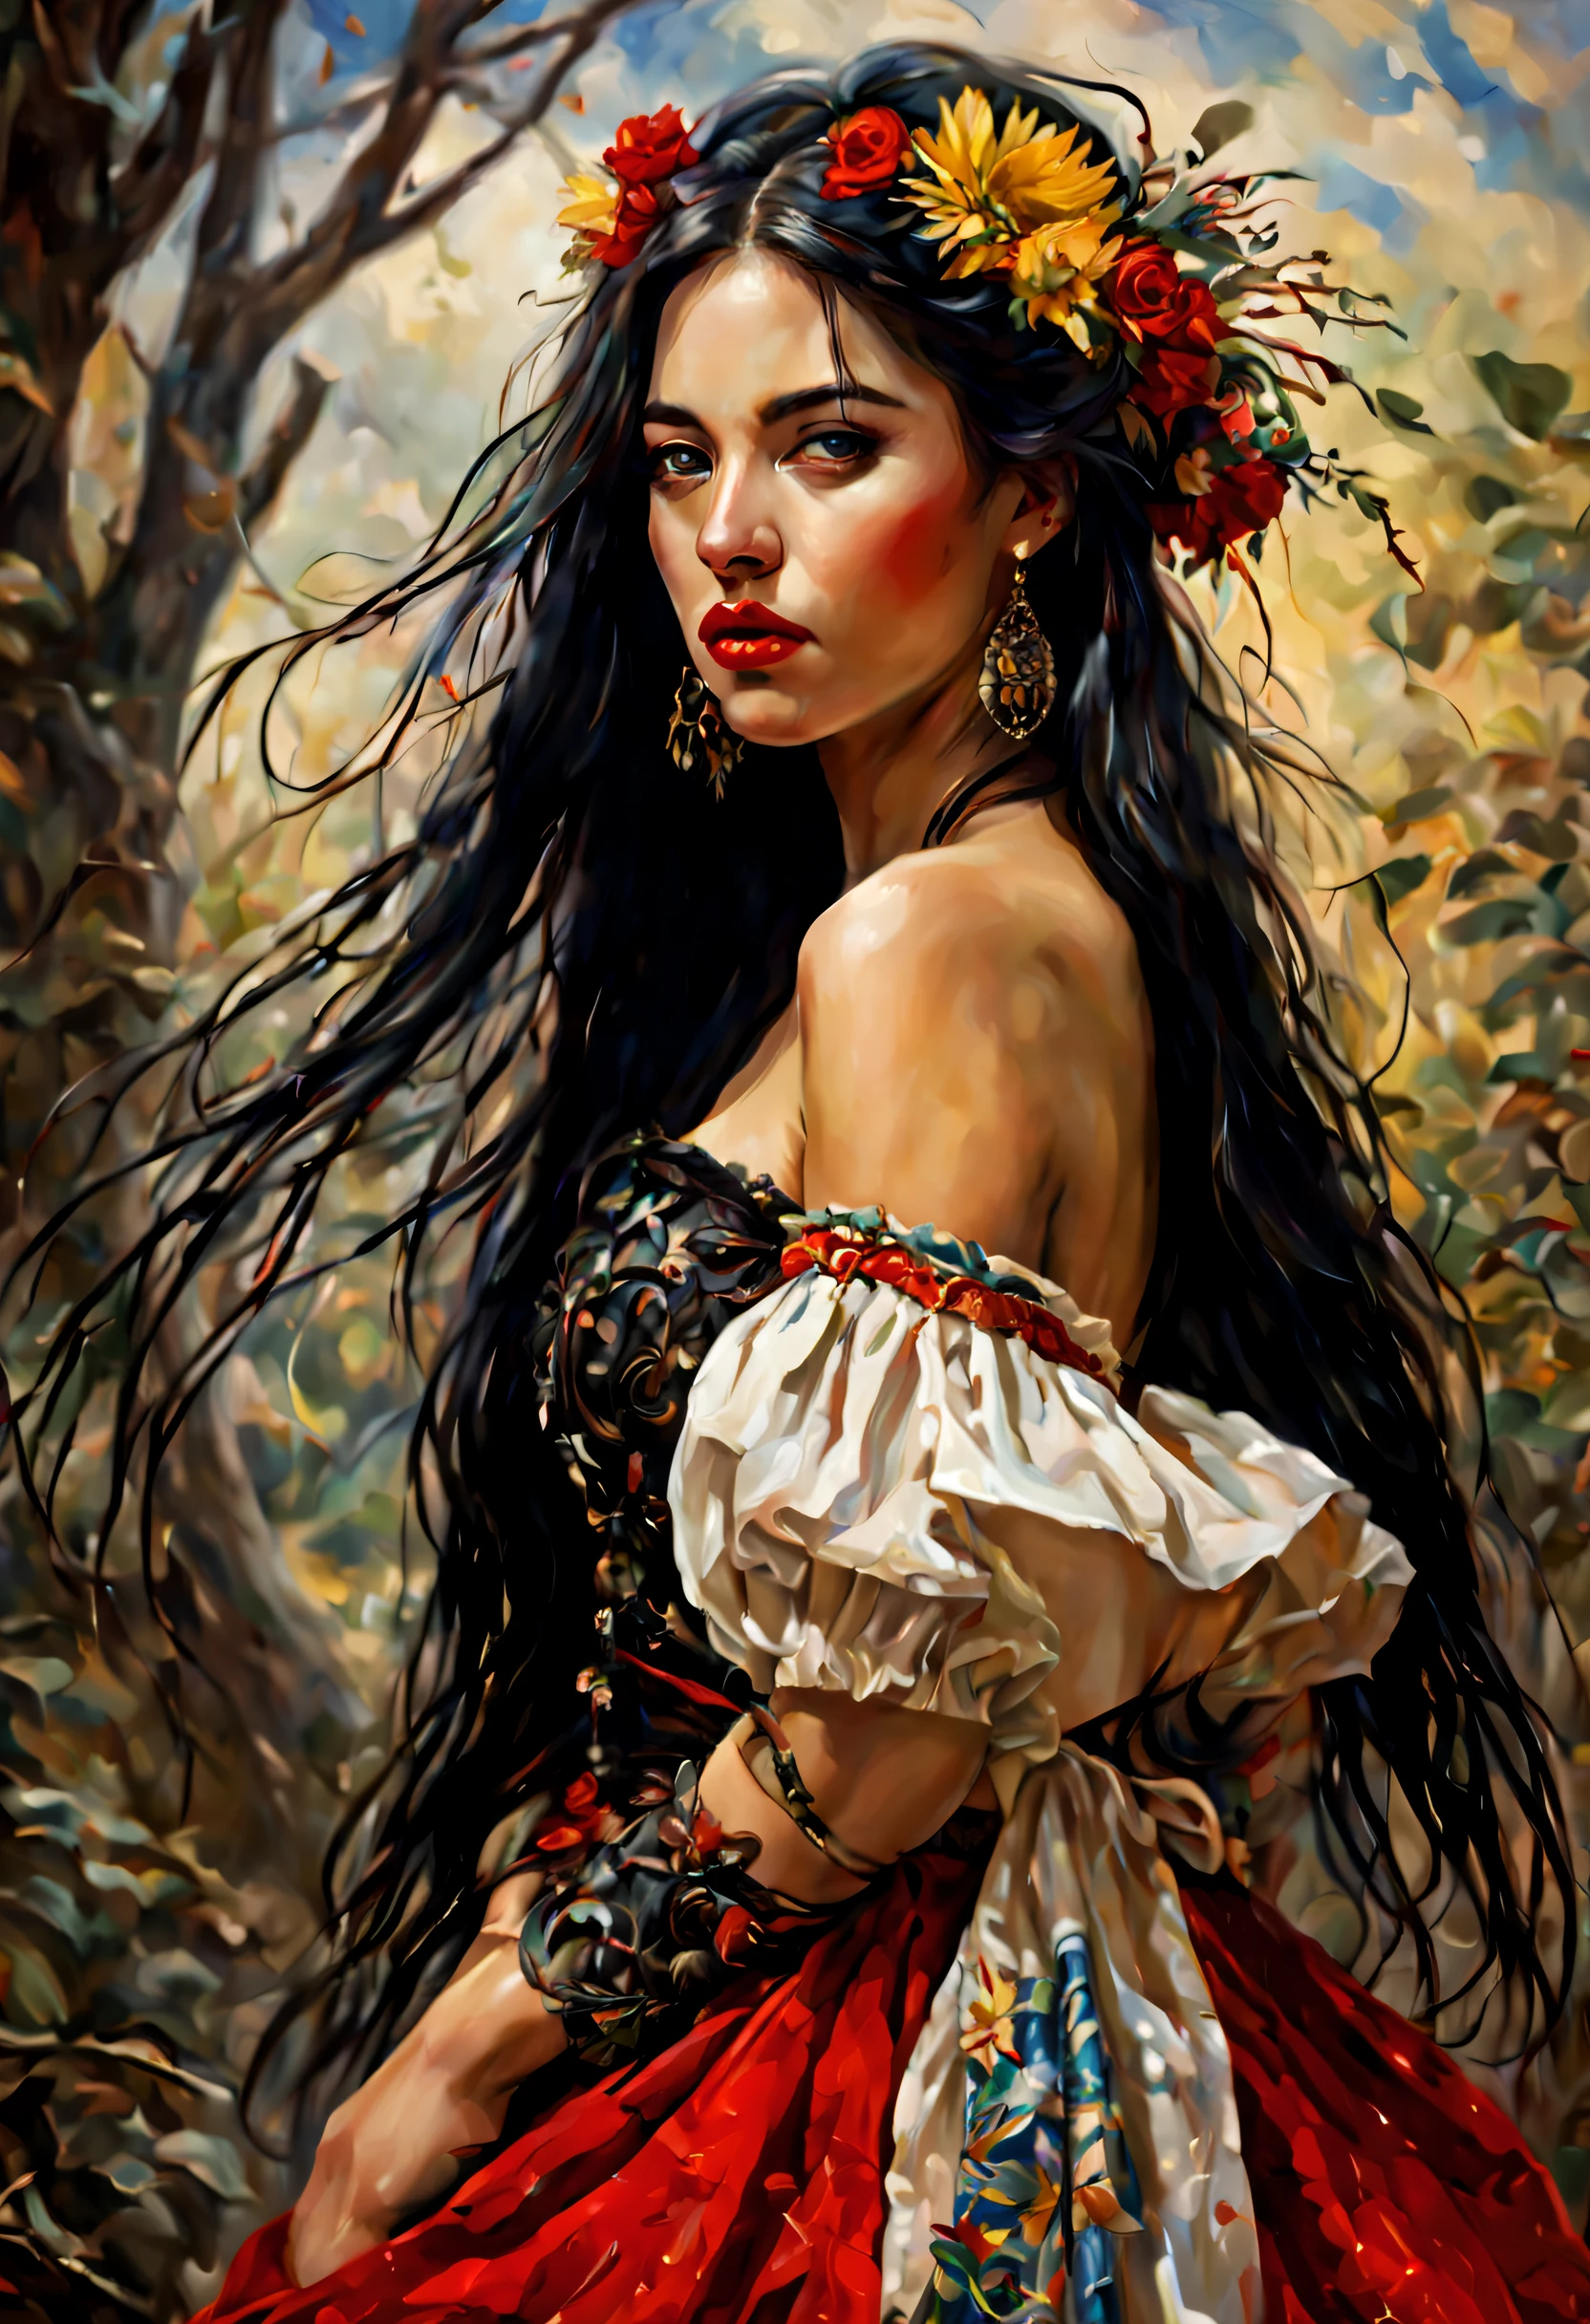 Young Bolivian woman with long black hair., Typical dress, Image rich in details,
Clear, painting oil painting, red lipstick, dramatic lighting, extremely realistic, 8k,
crazy details, intricate, bokeh, taken with a 60mm lens, ISO 300, F/4, 1/200th,
vivid colors, by Pino Daeni, Vincent Van Gogh, Luis Royo, Frank Frazetta